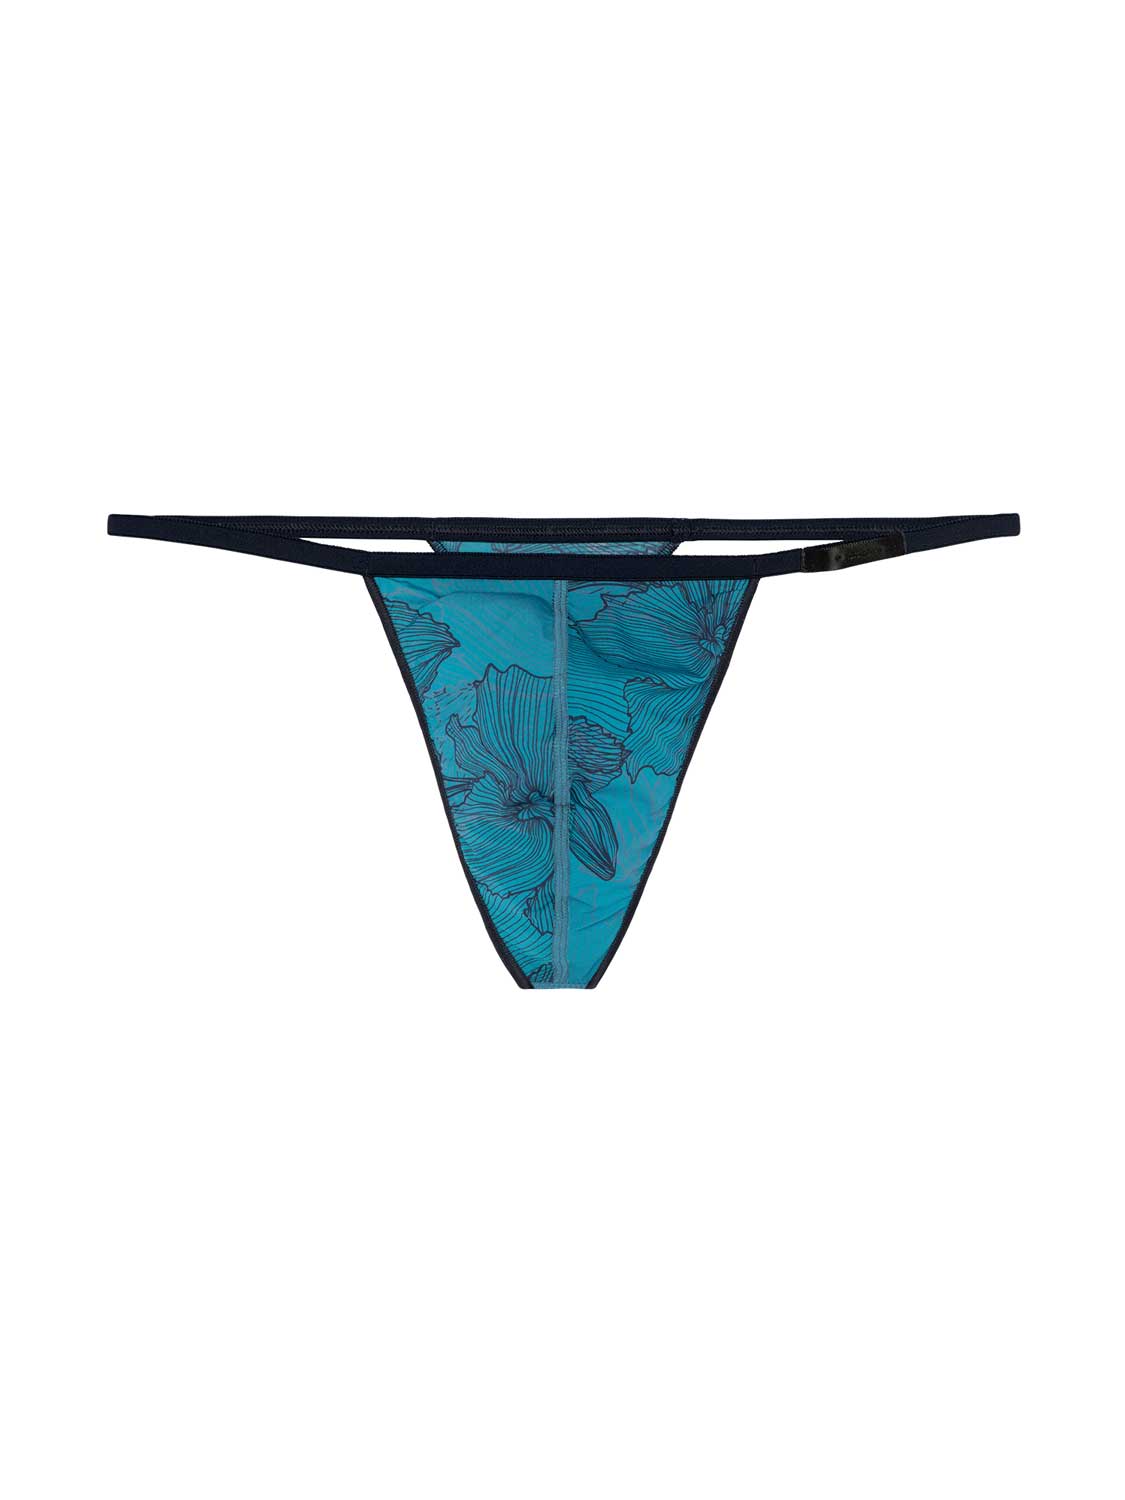 HOM G-String in midblue from the Plume collection